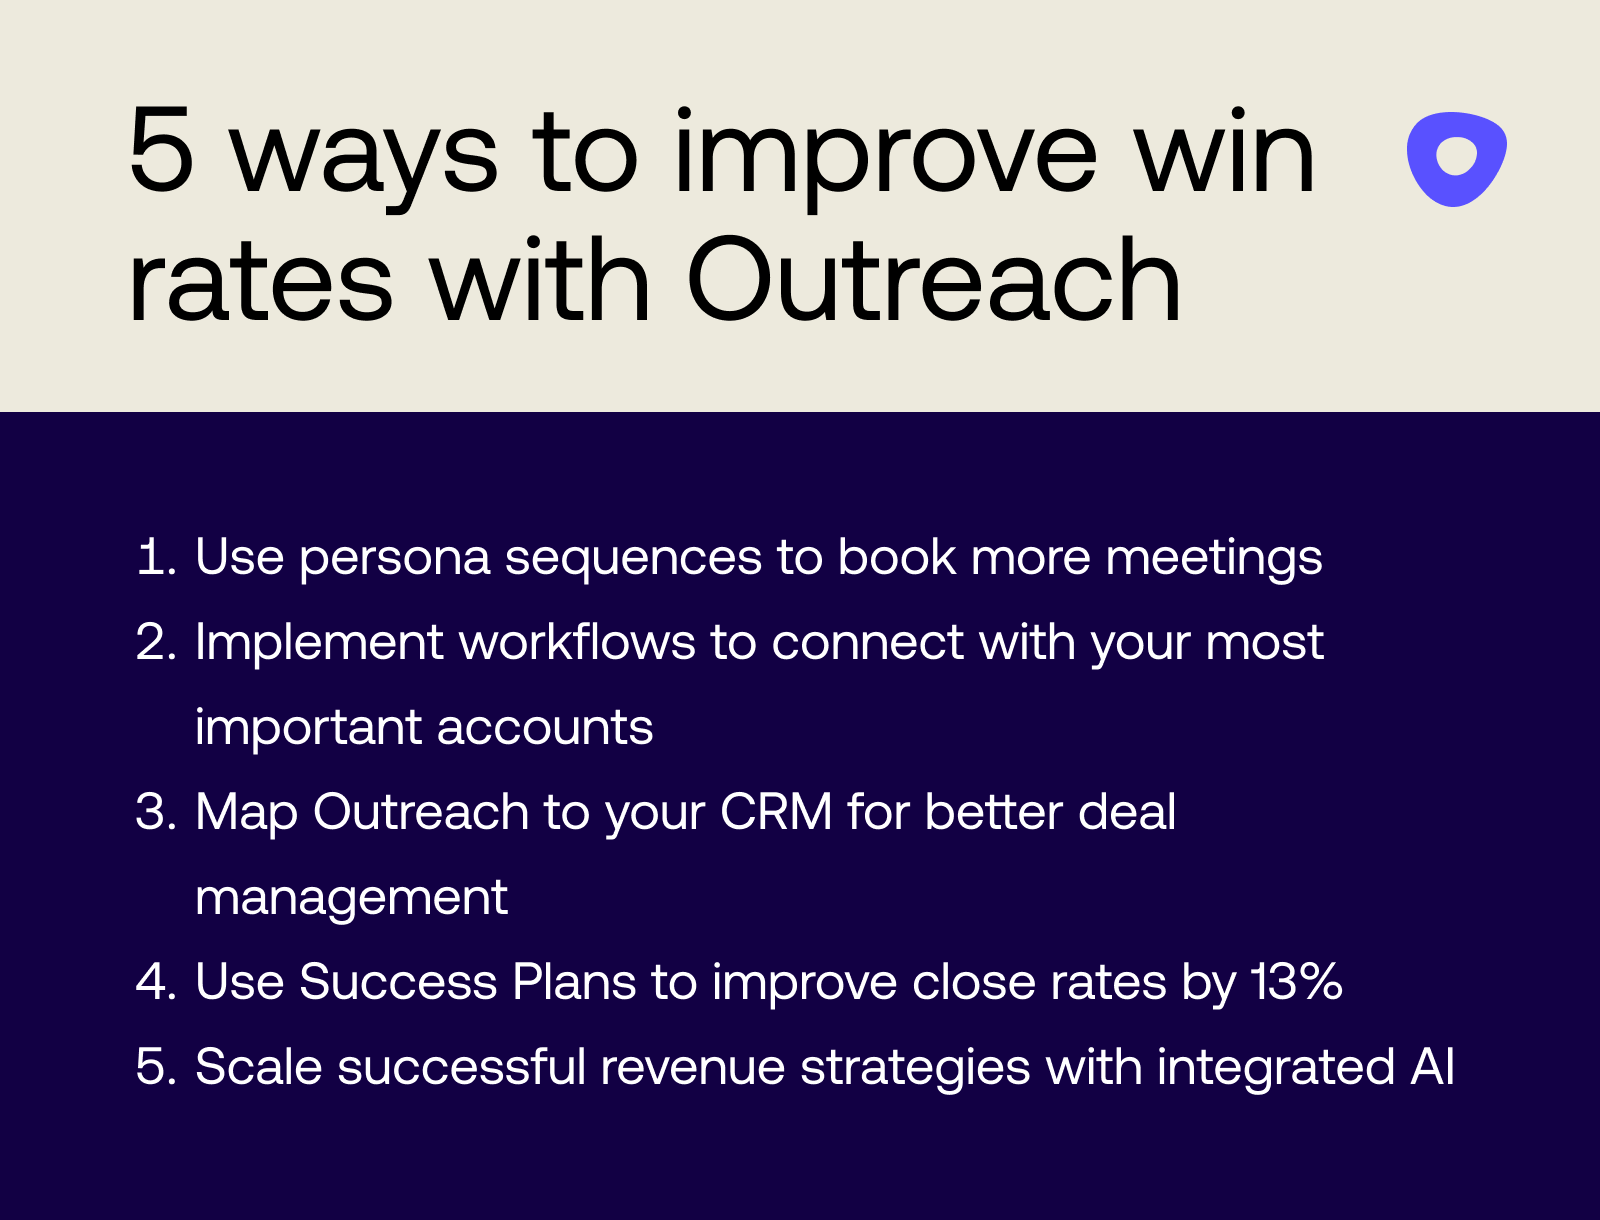 5 Ways To Improve Win Rates with Outreach